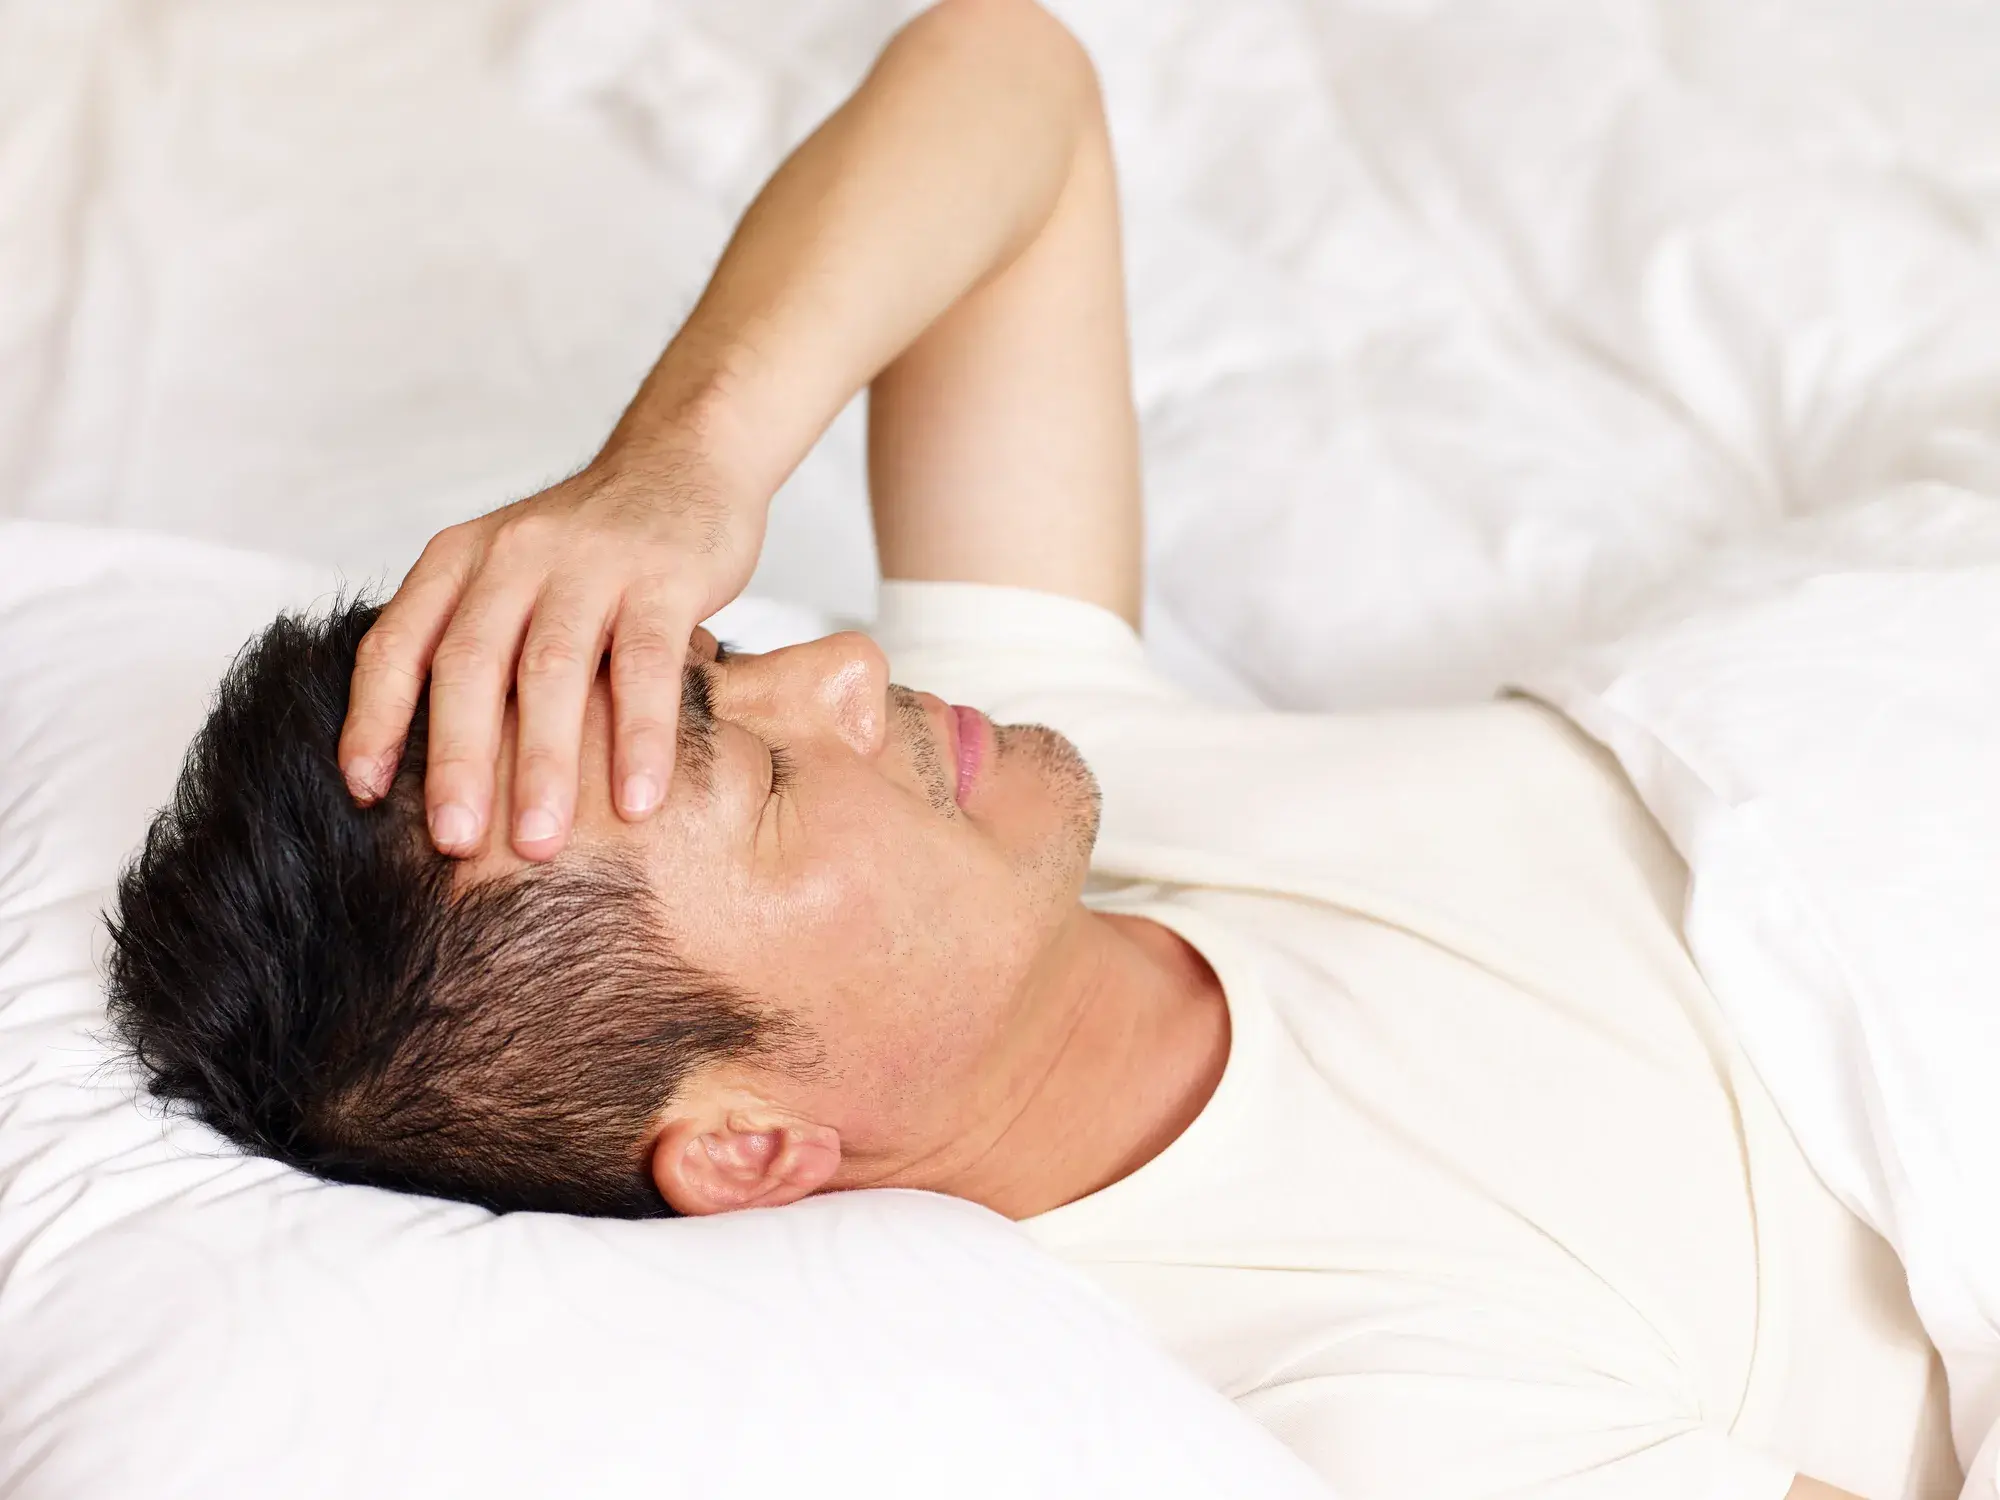 How to Sleep with Sciatica: Causes, Sleep Positions, and Tips